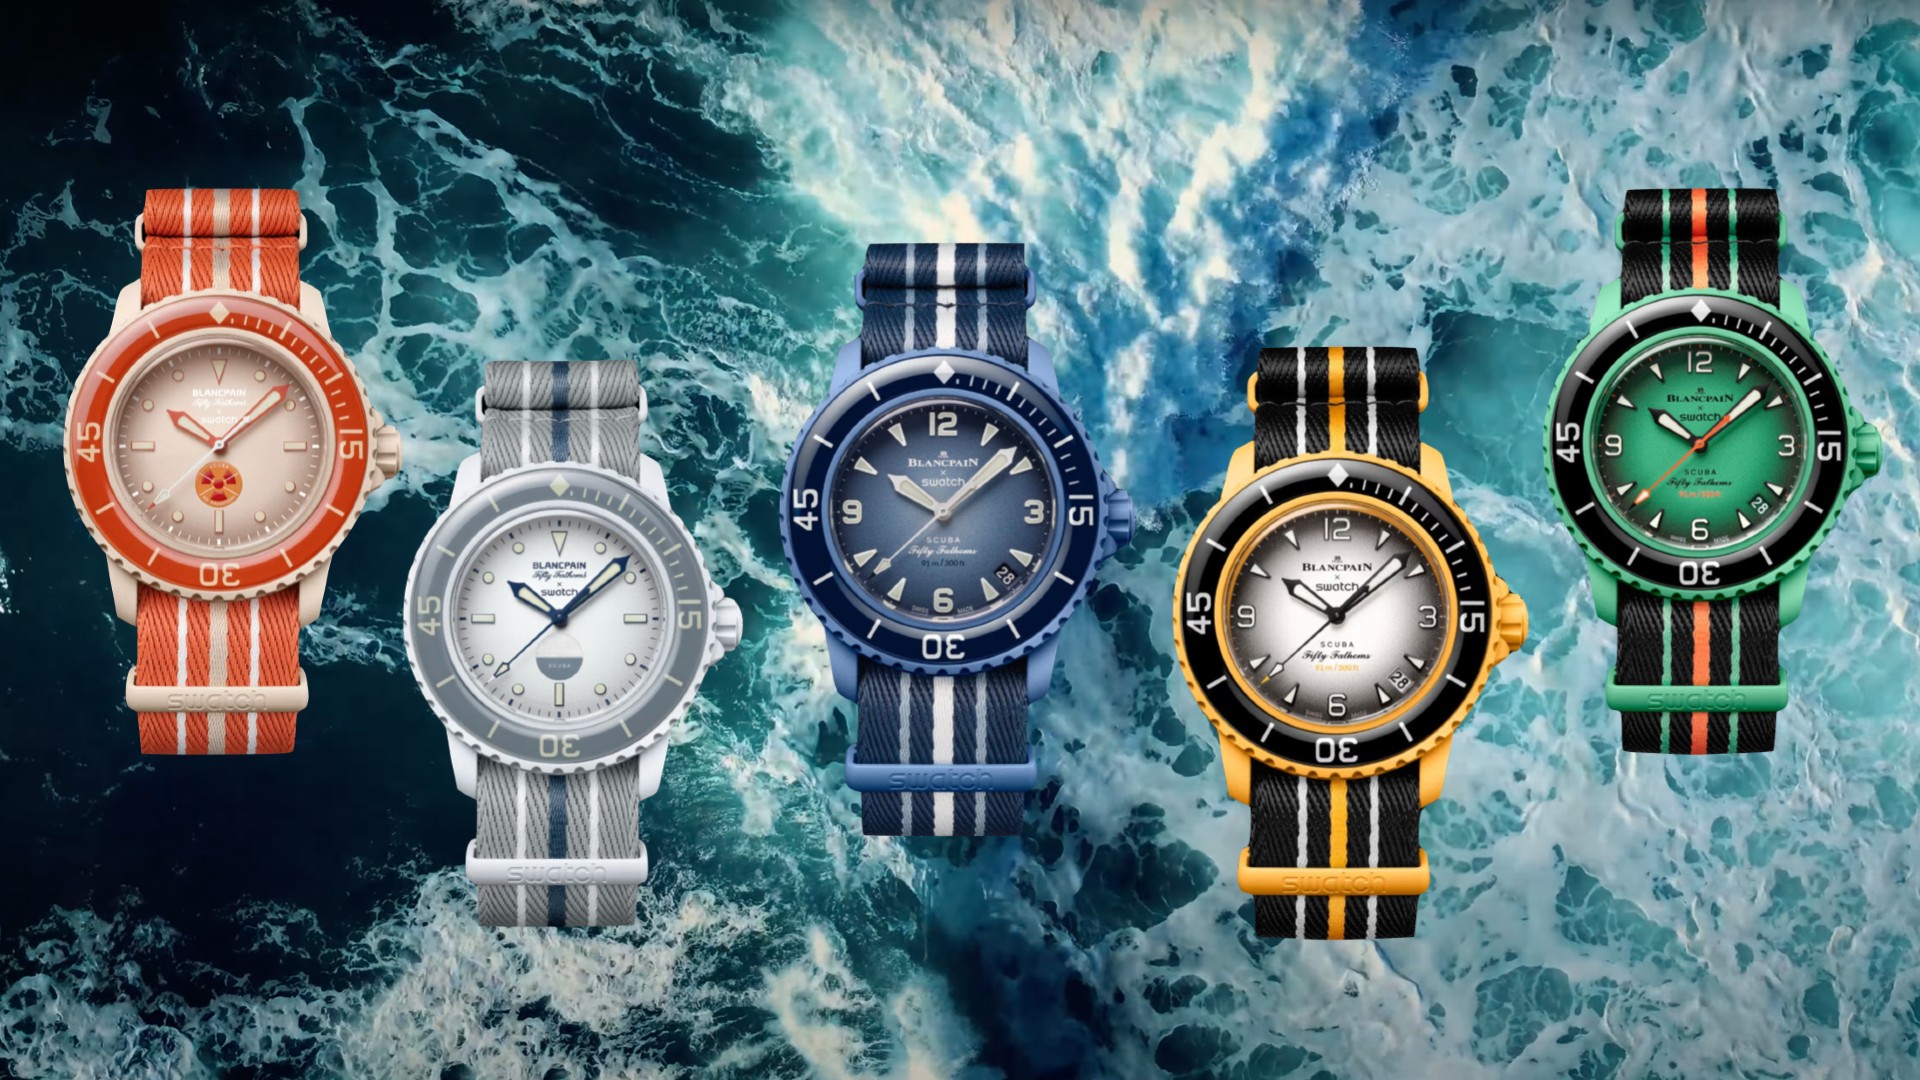 Where you can still buy the Omega X Swatch MoonSwatch watches today